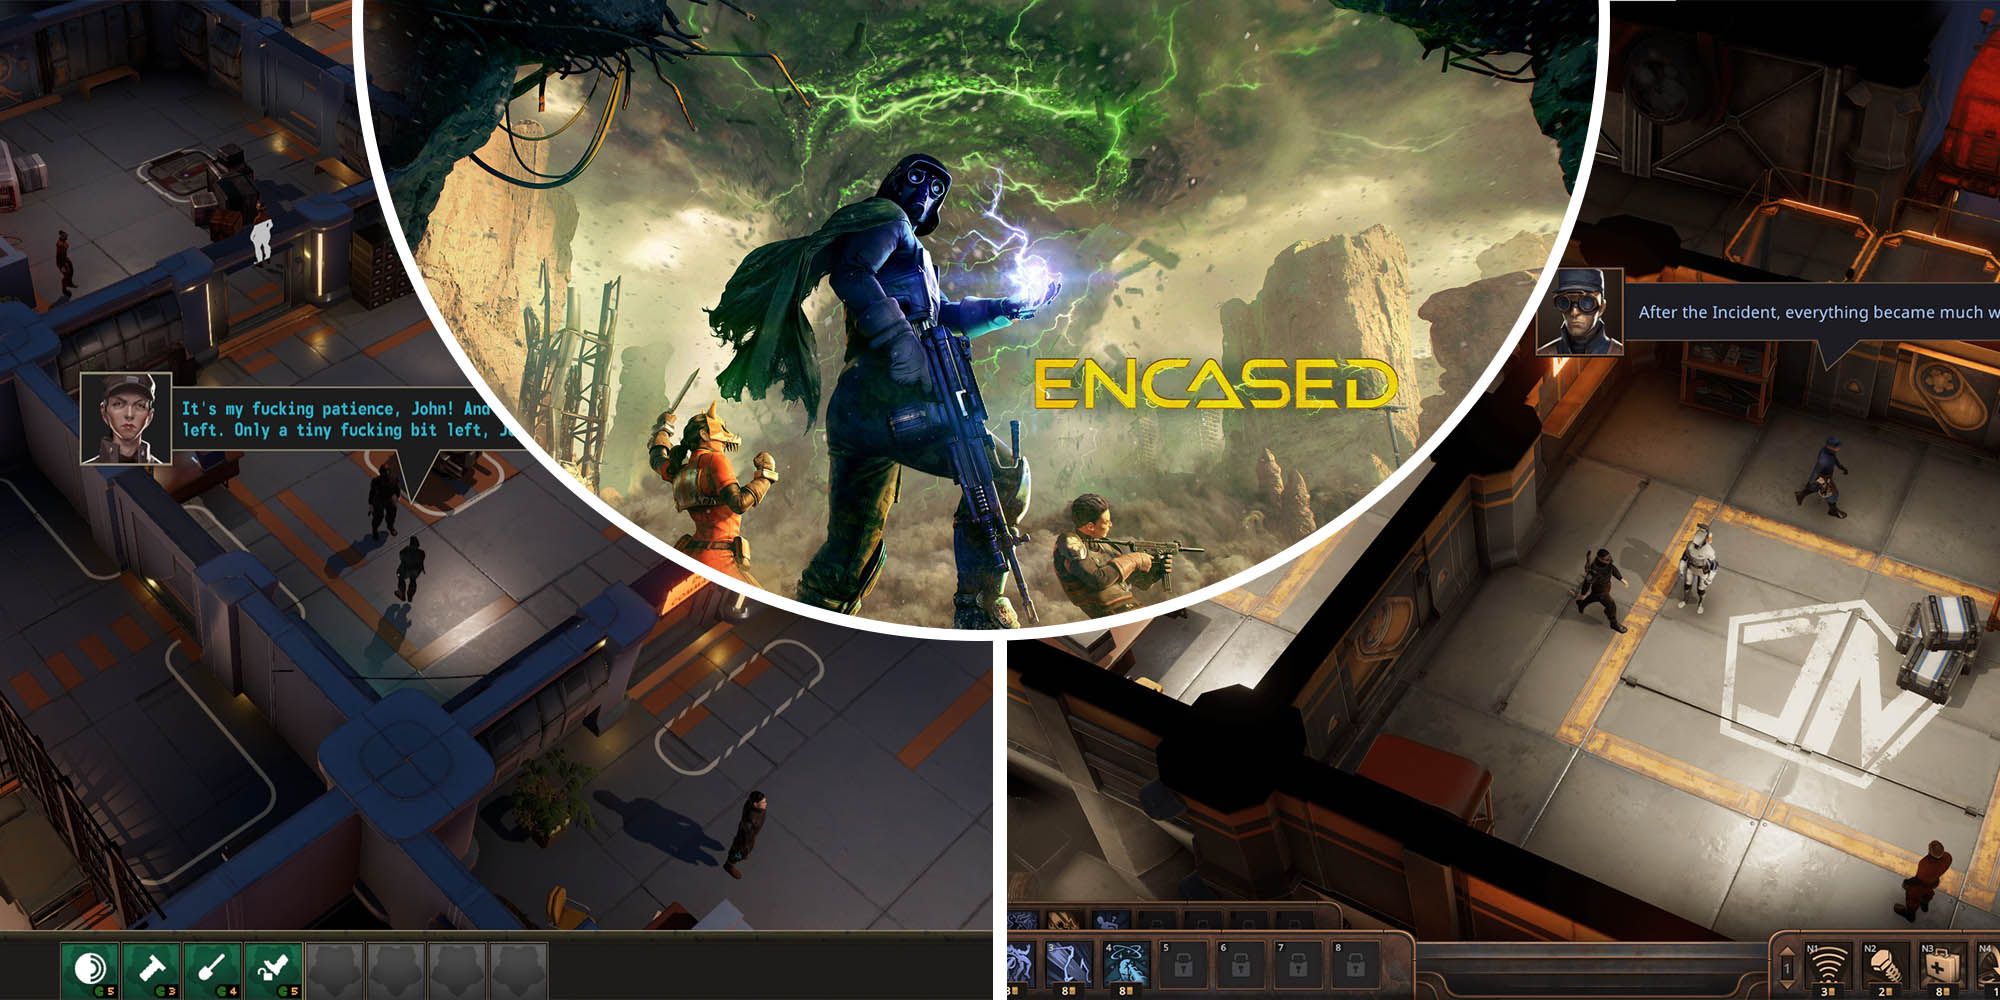 Encased is the next Epic Games Store free game